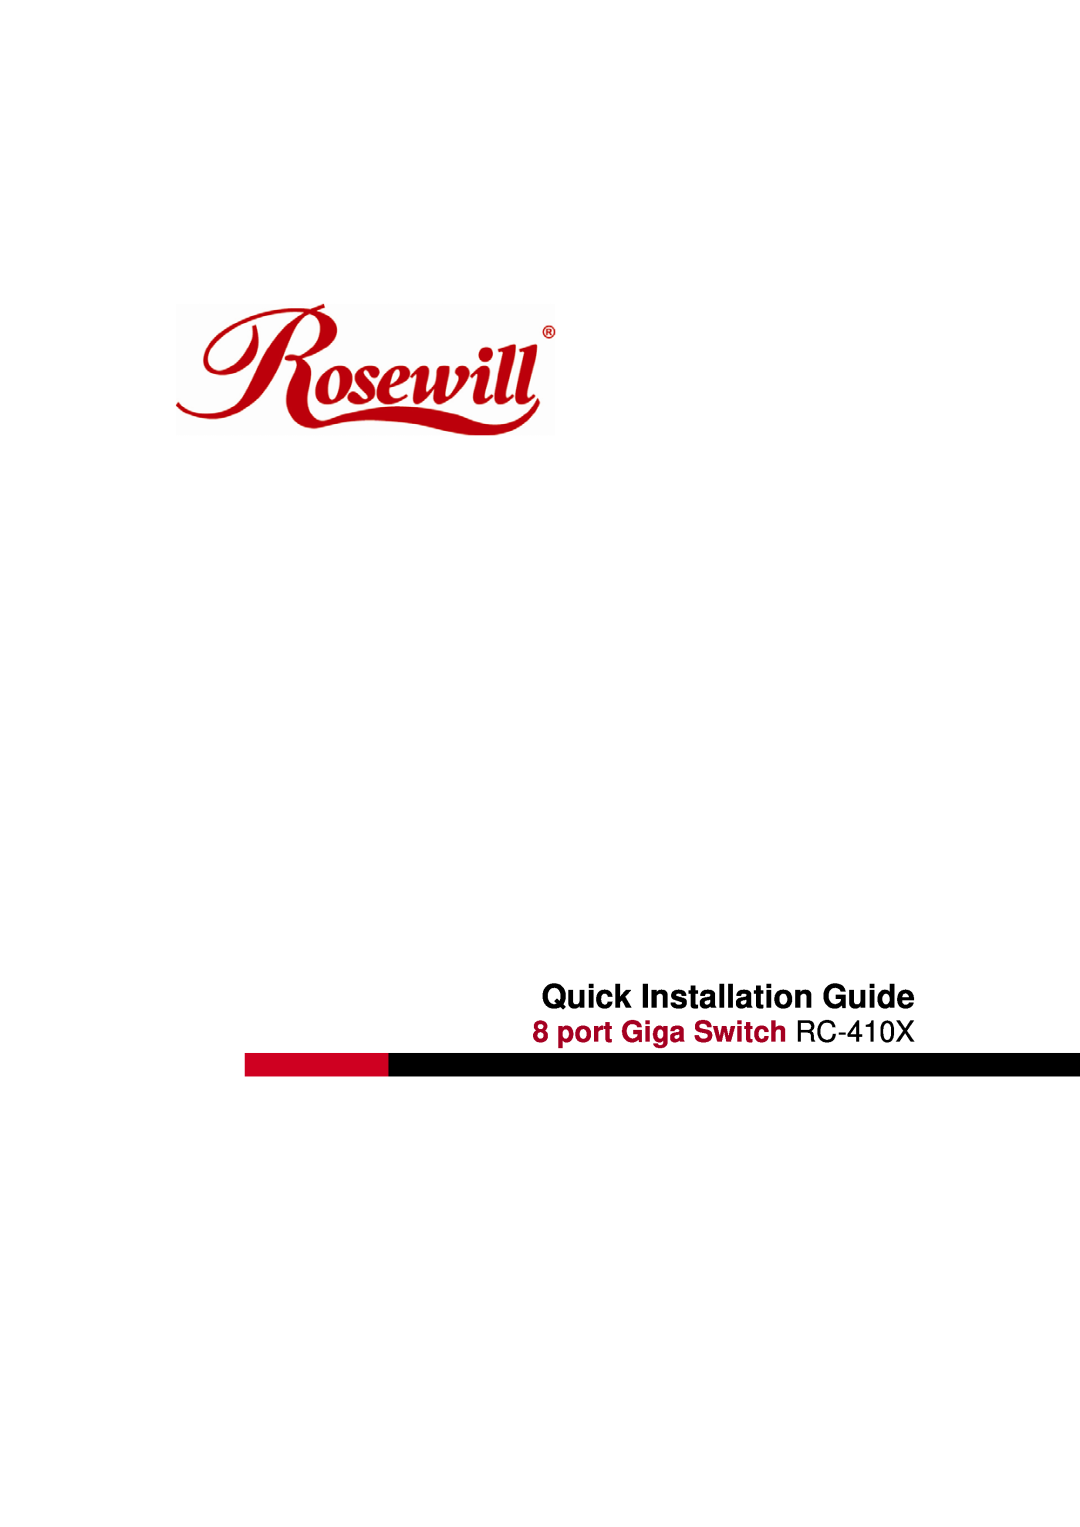 Rosewill manual Quick Installation Guide, port Giga Switch RC-410X 